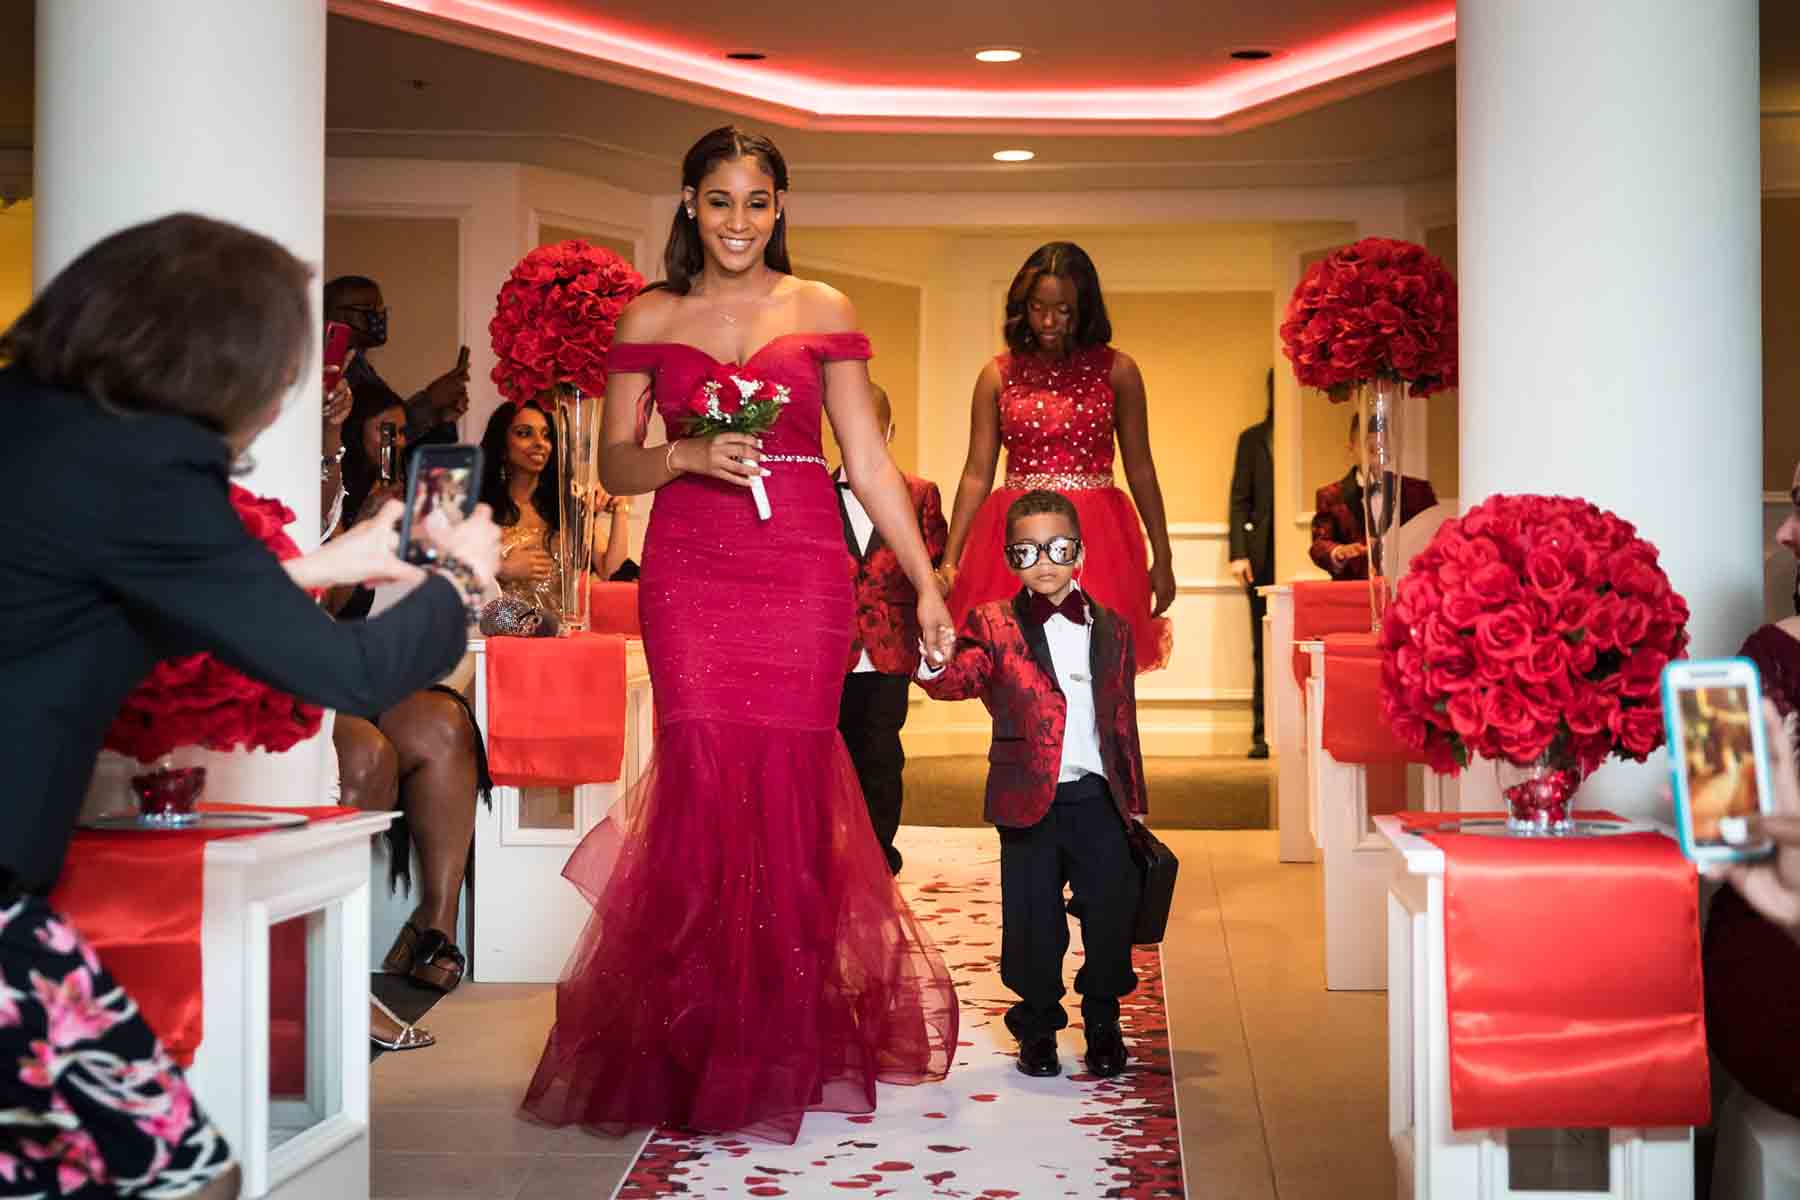 Woman in floor-length red dress leading little ring bearer down aisle for an article on the best wedding jobs for family and friends